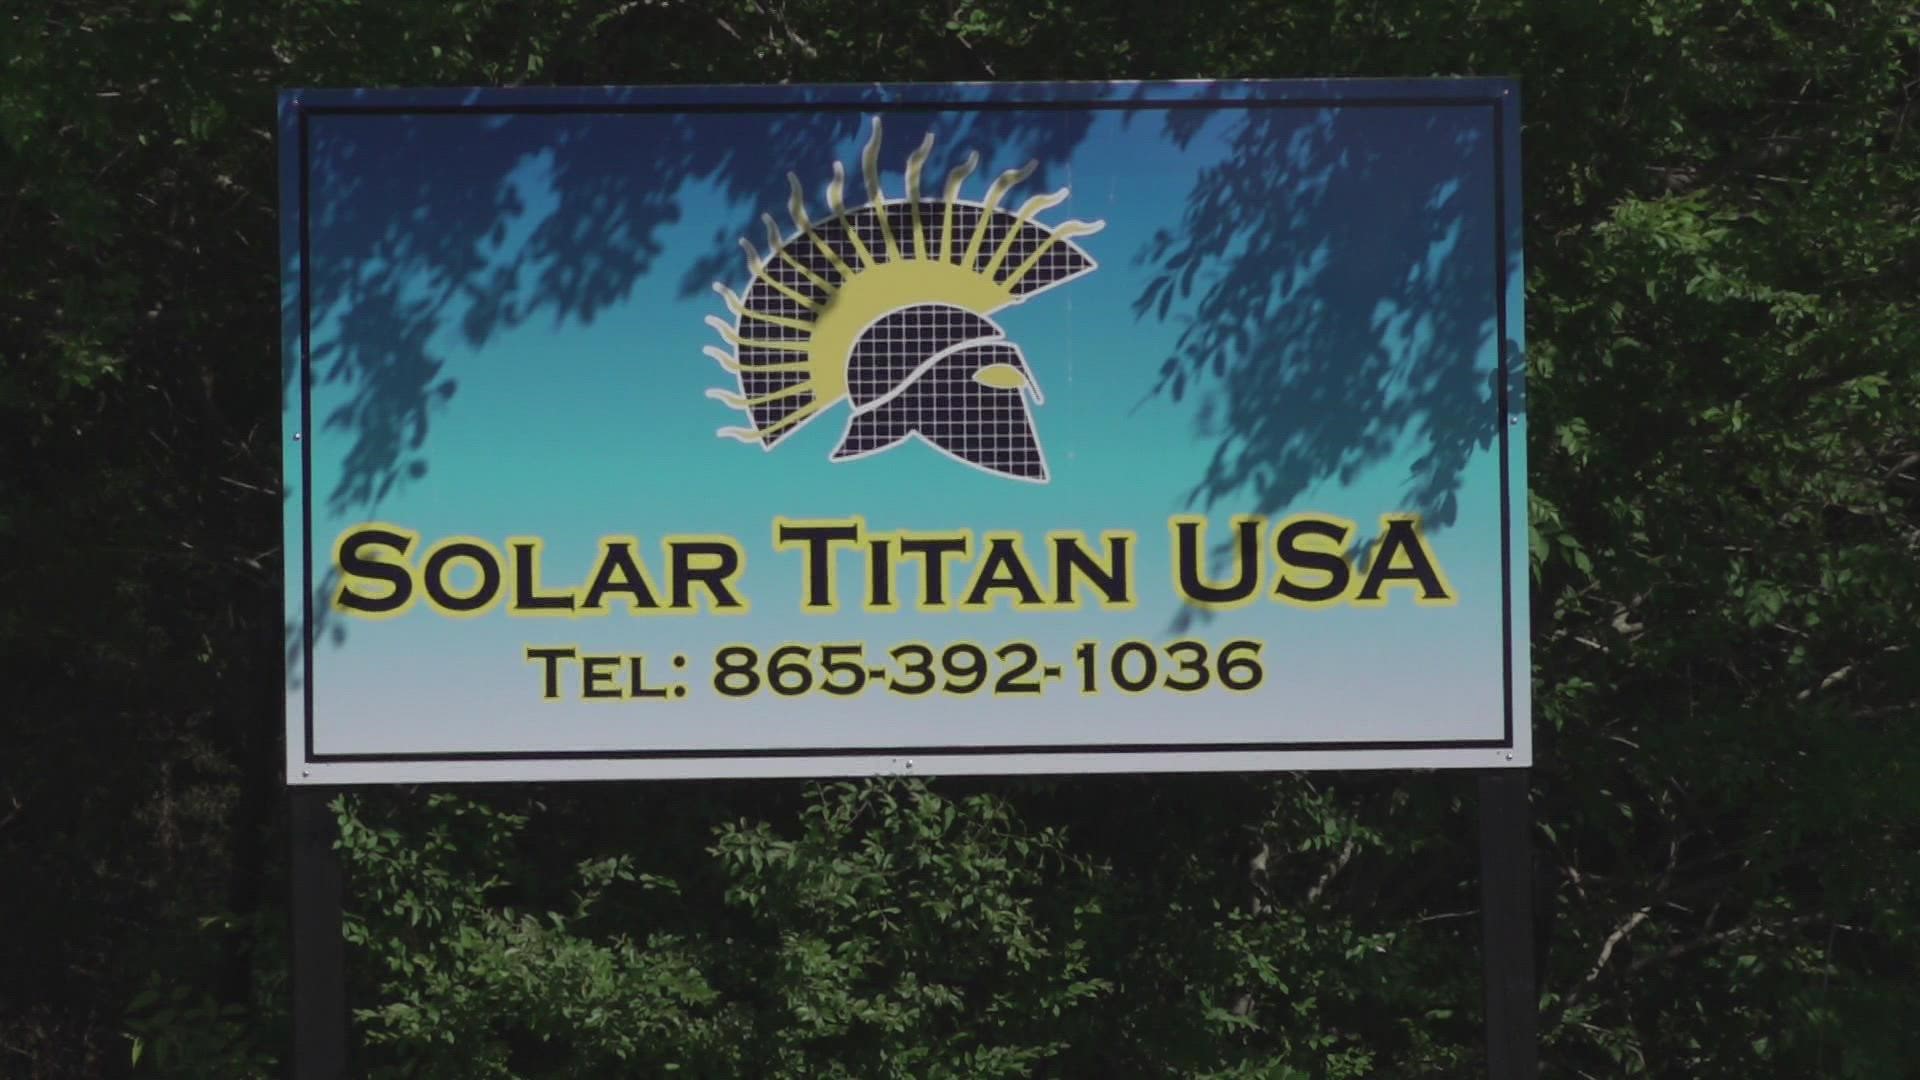 At least 140 complaints against Solar Titan USA have been filed with the Tennessee and Kentucky attorneys general. The company is under investigation in Georgia too.